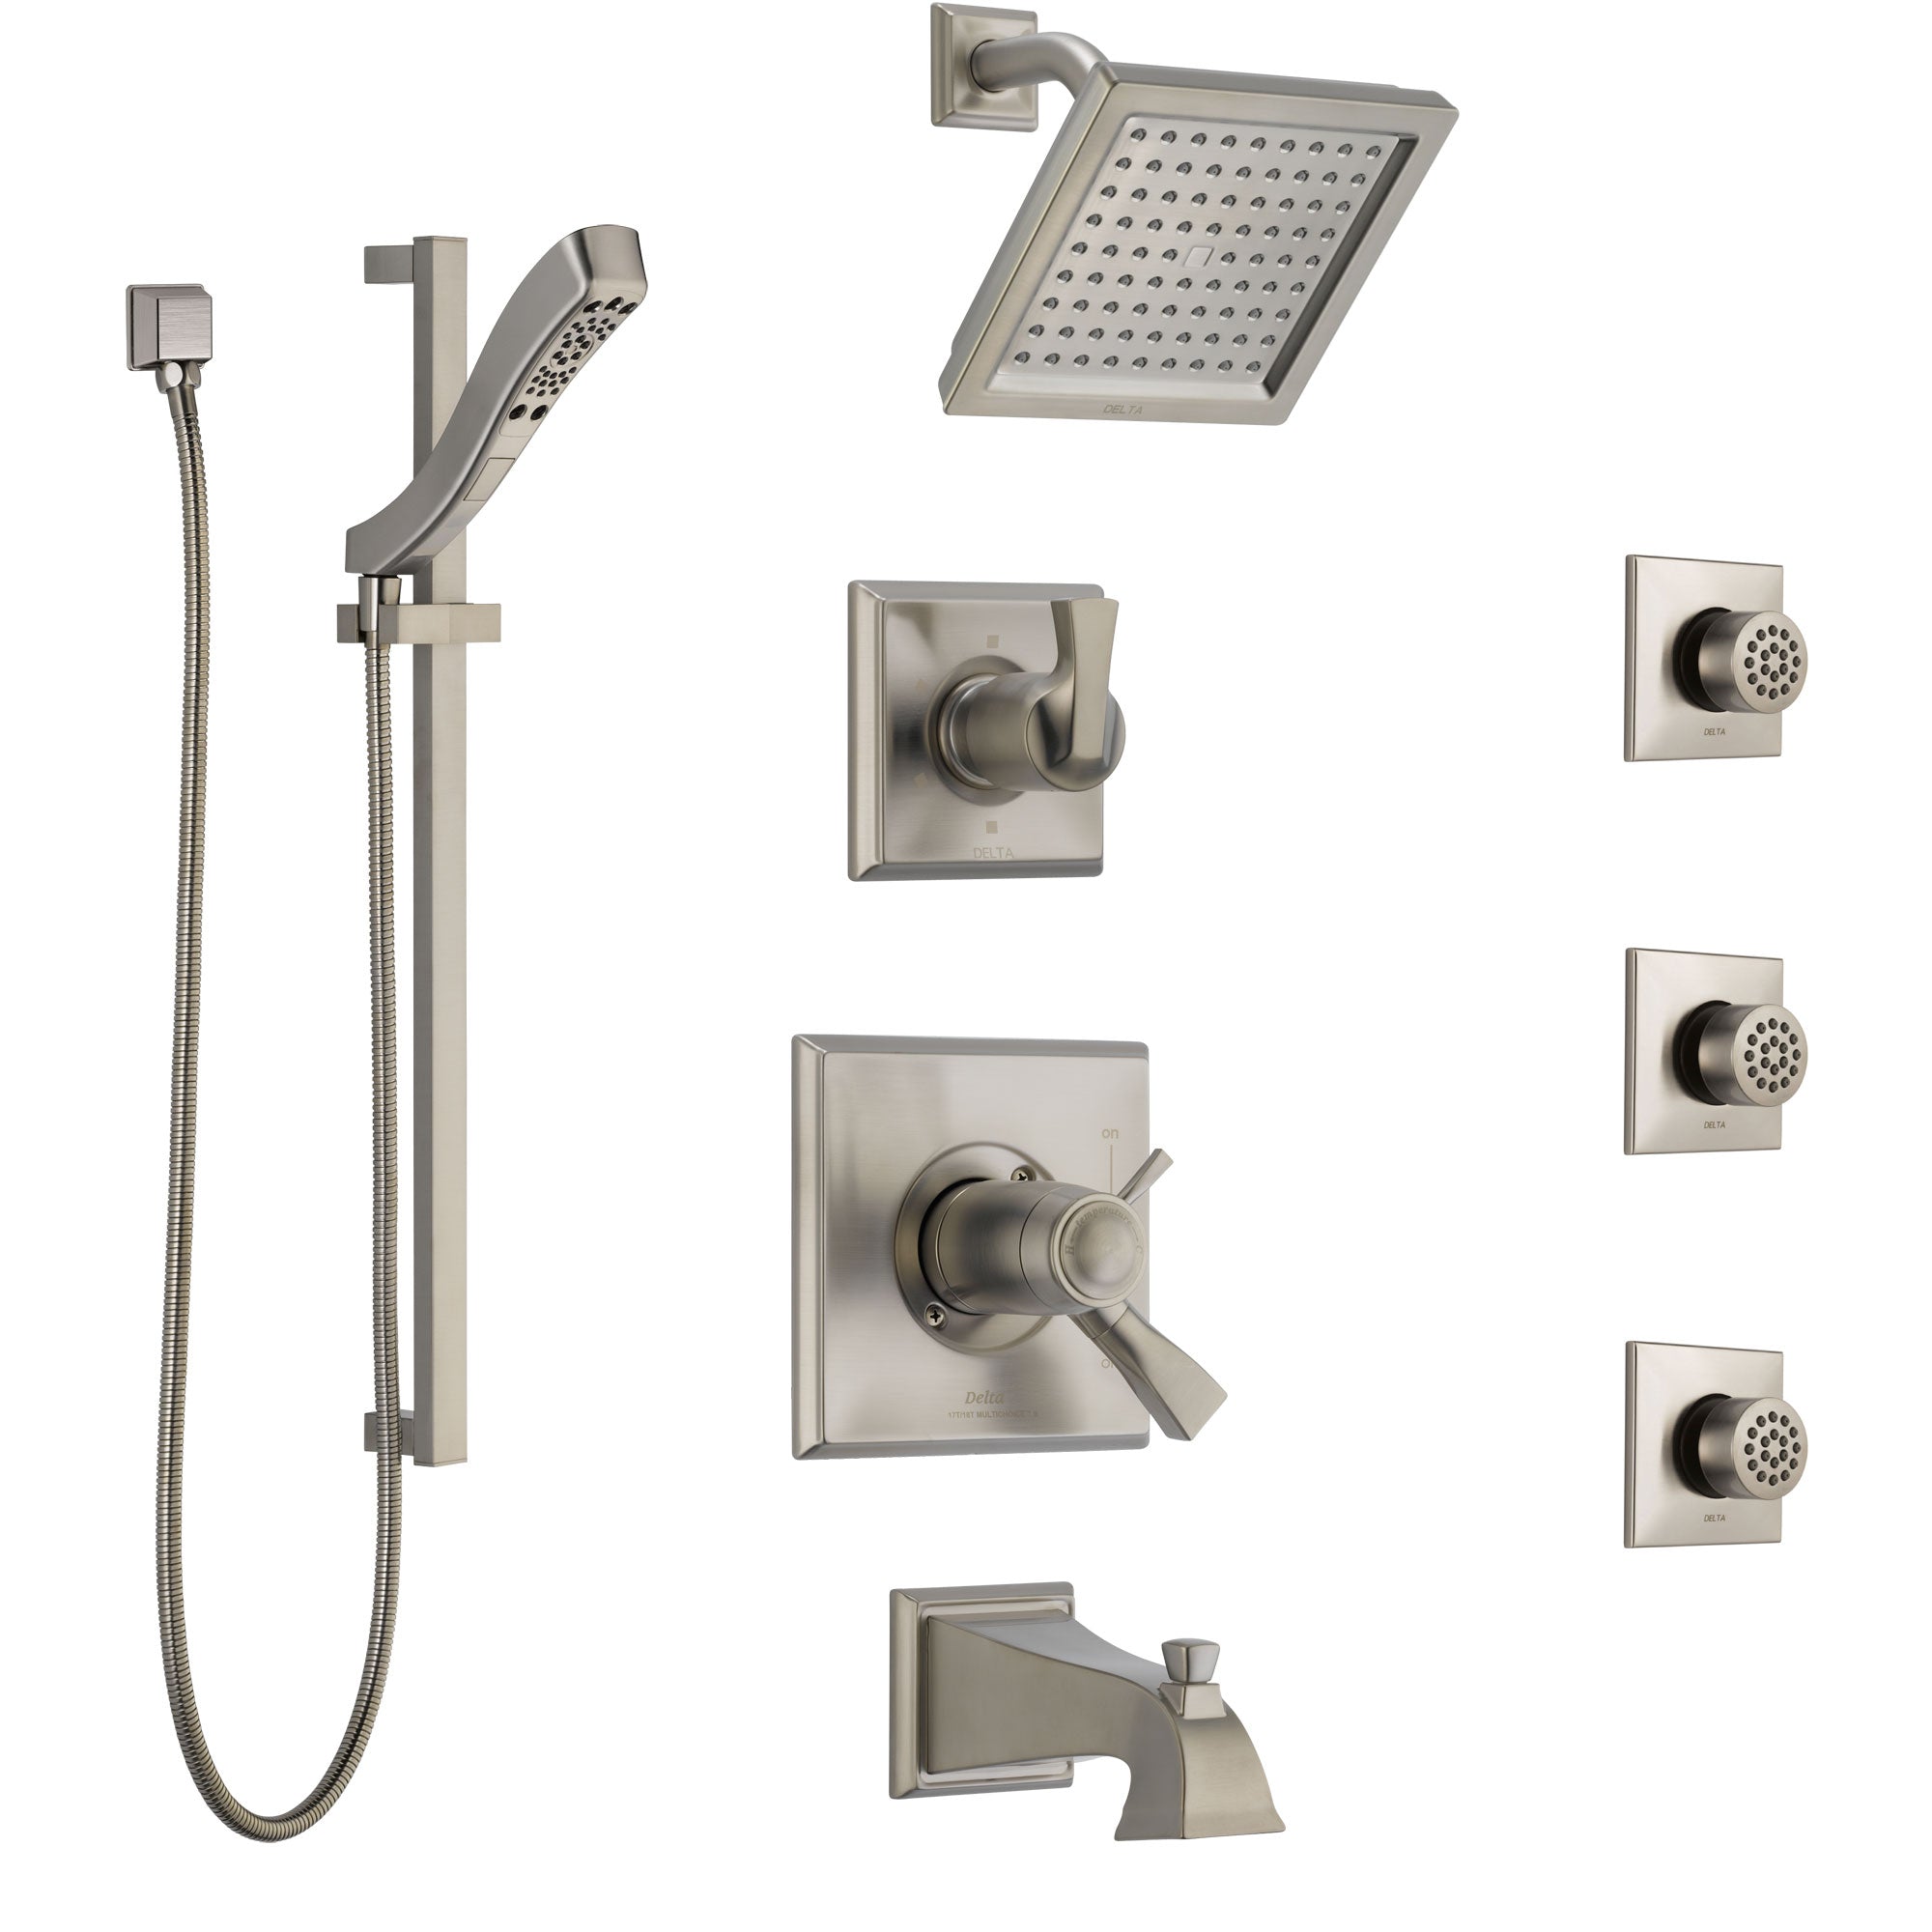 Delta Dryden Stainless Steel Finish Dual Thermostatic Control Tub and Shower System, Diverter, Showerhead, 3 Body Sprays, and Hand Shower SS17T4512SS6